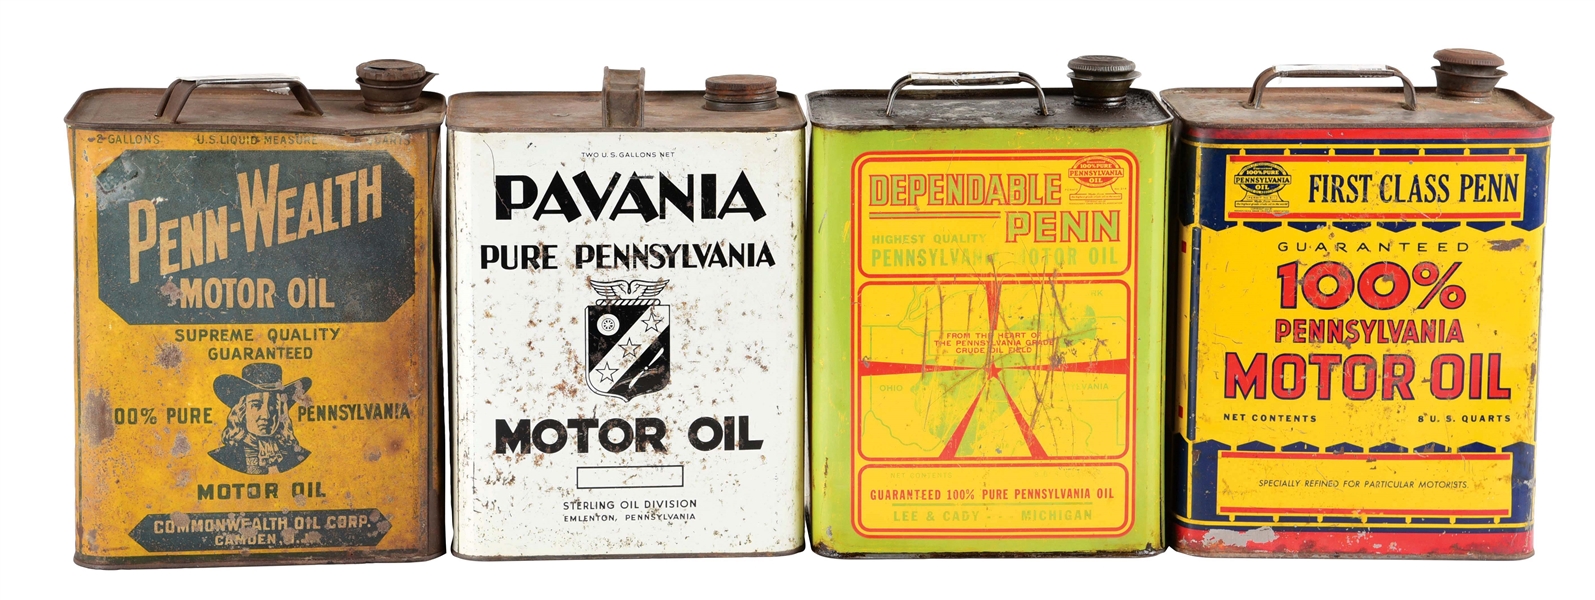 LOT OF 4: TWO GALLON OIL CANS FROM DEPENDABLE PENN, FIRST CLASS PENN, PAVANIA & PENN WEALTH MOTOR OILS. 